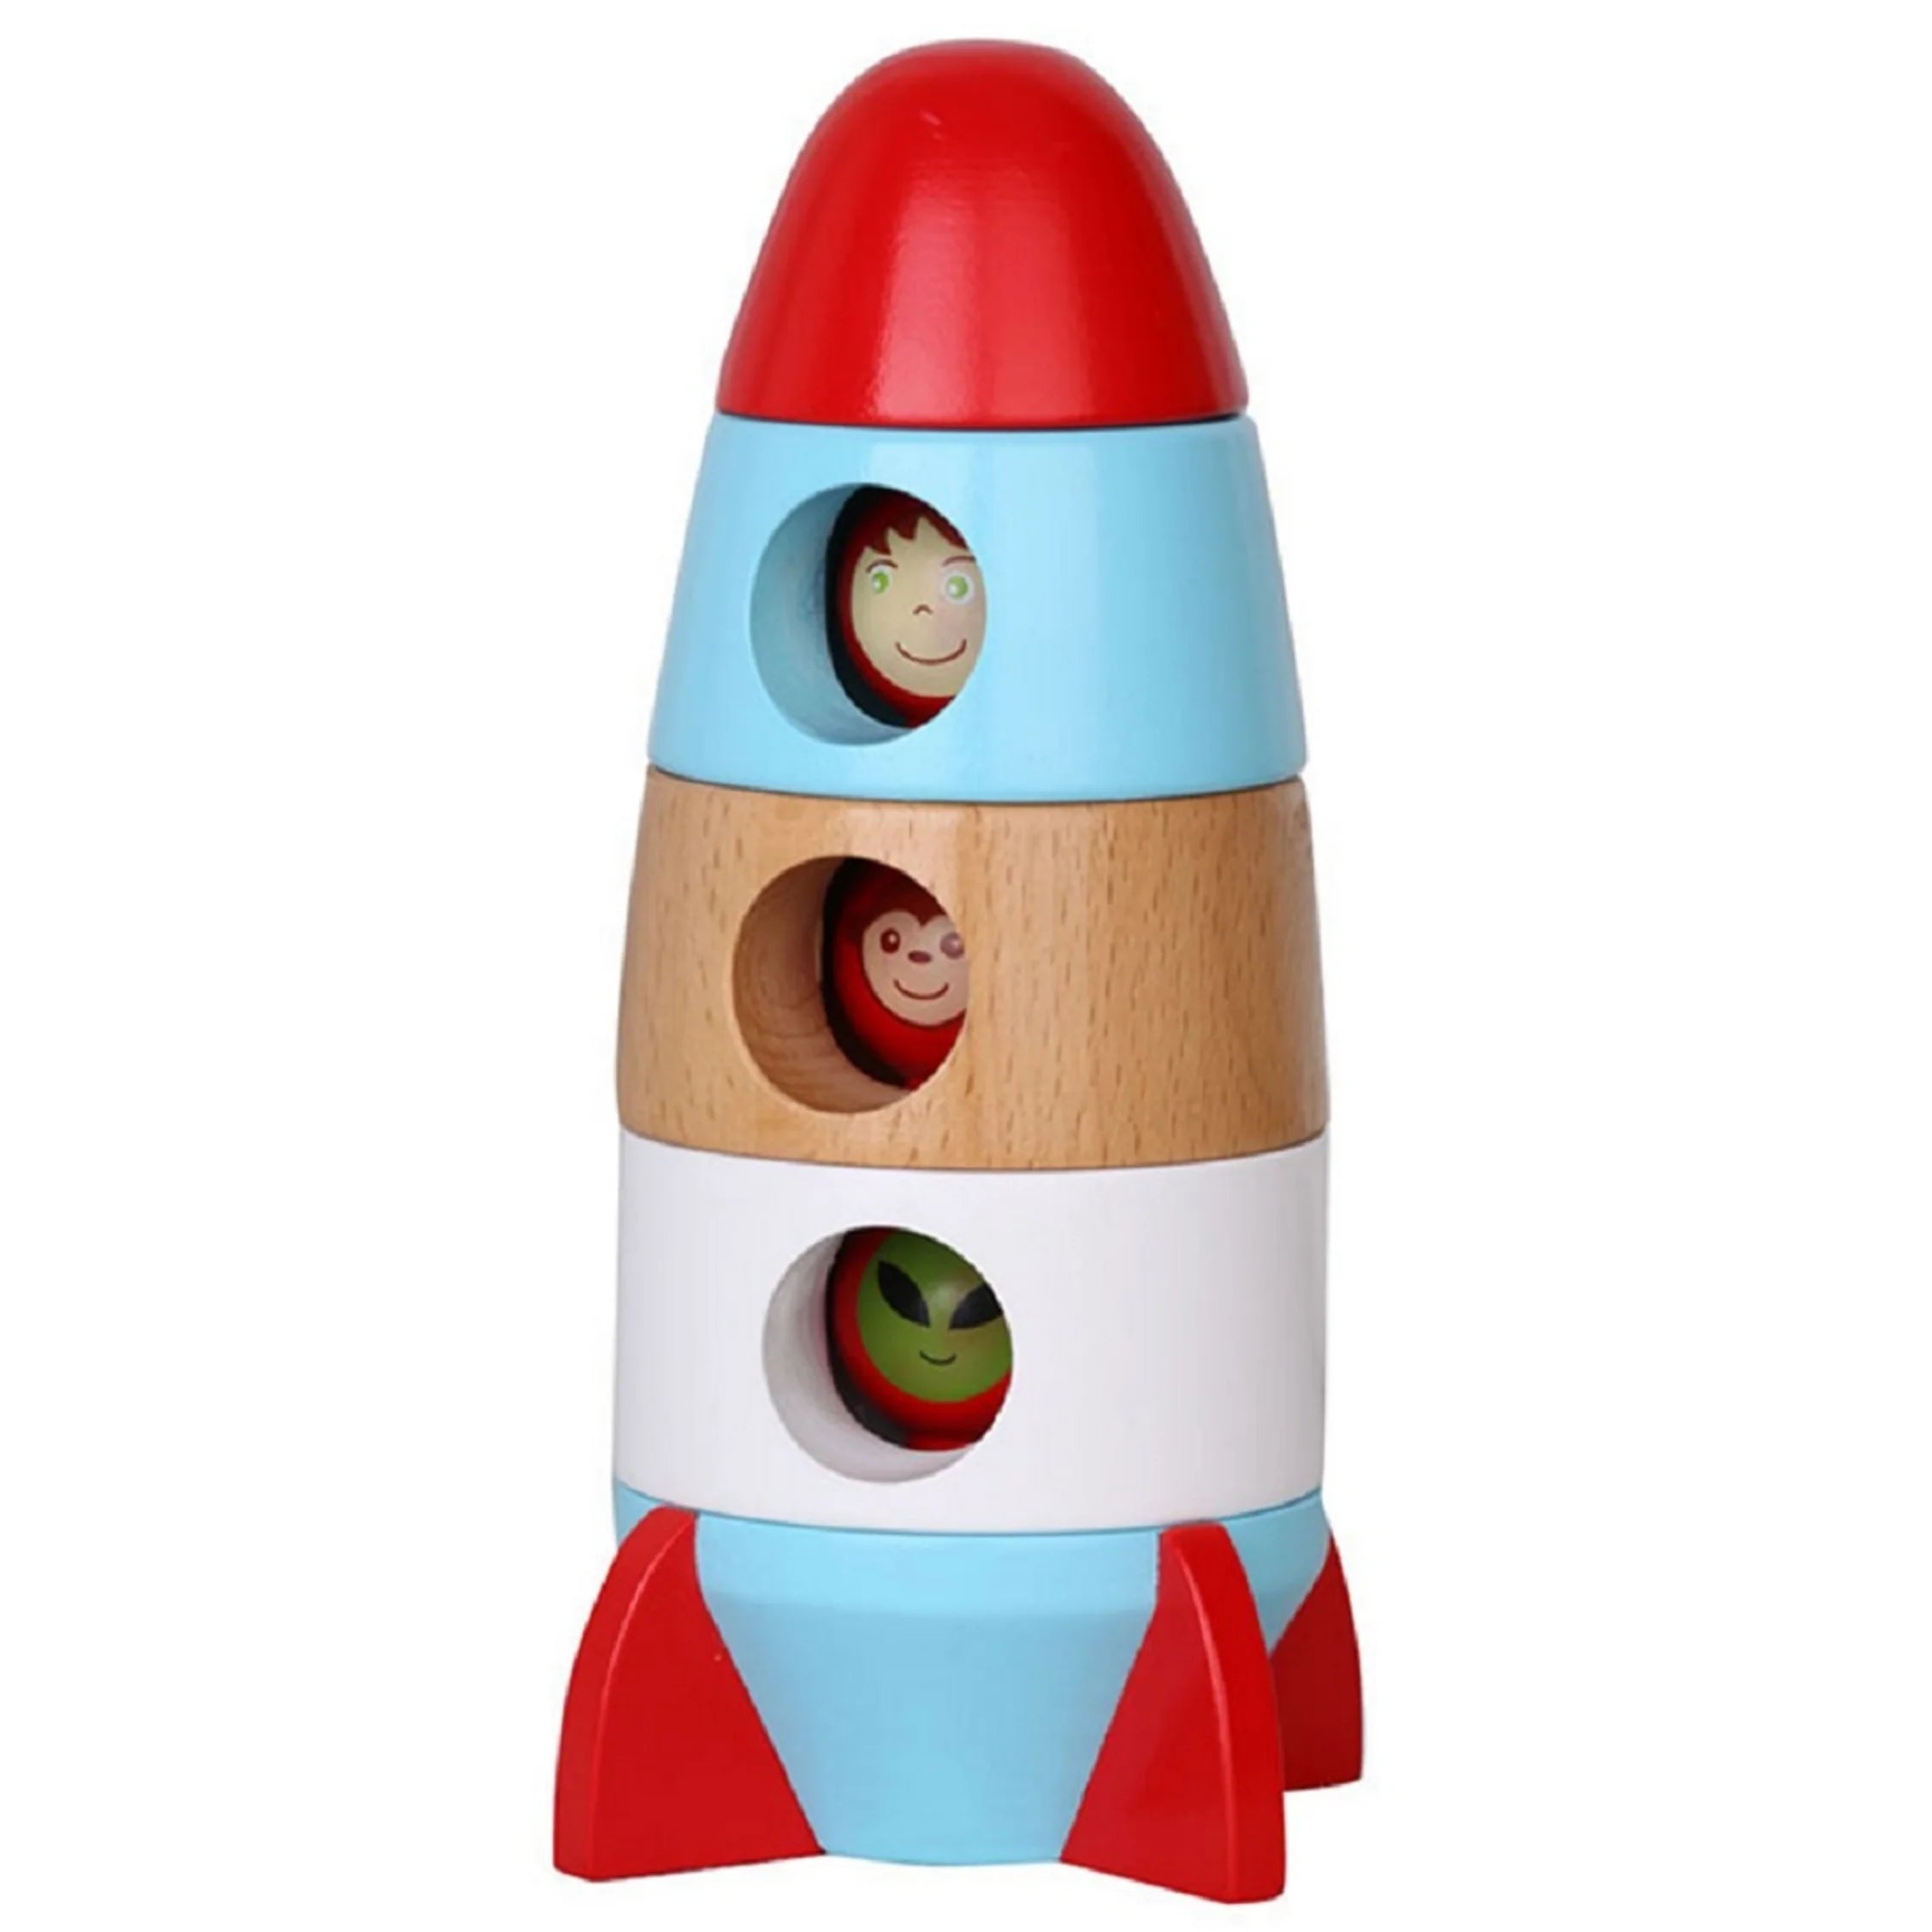 Discoveroo Wooden Magnetic Rocket